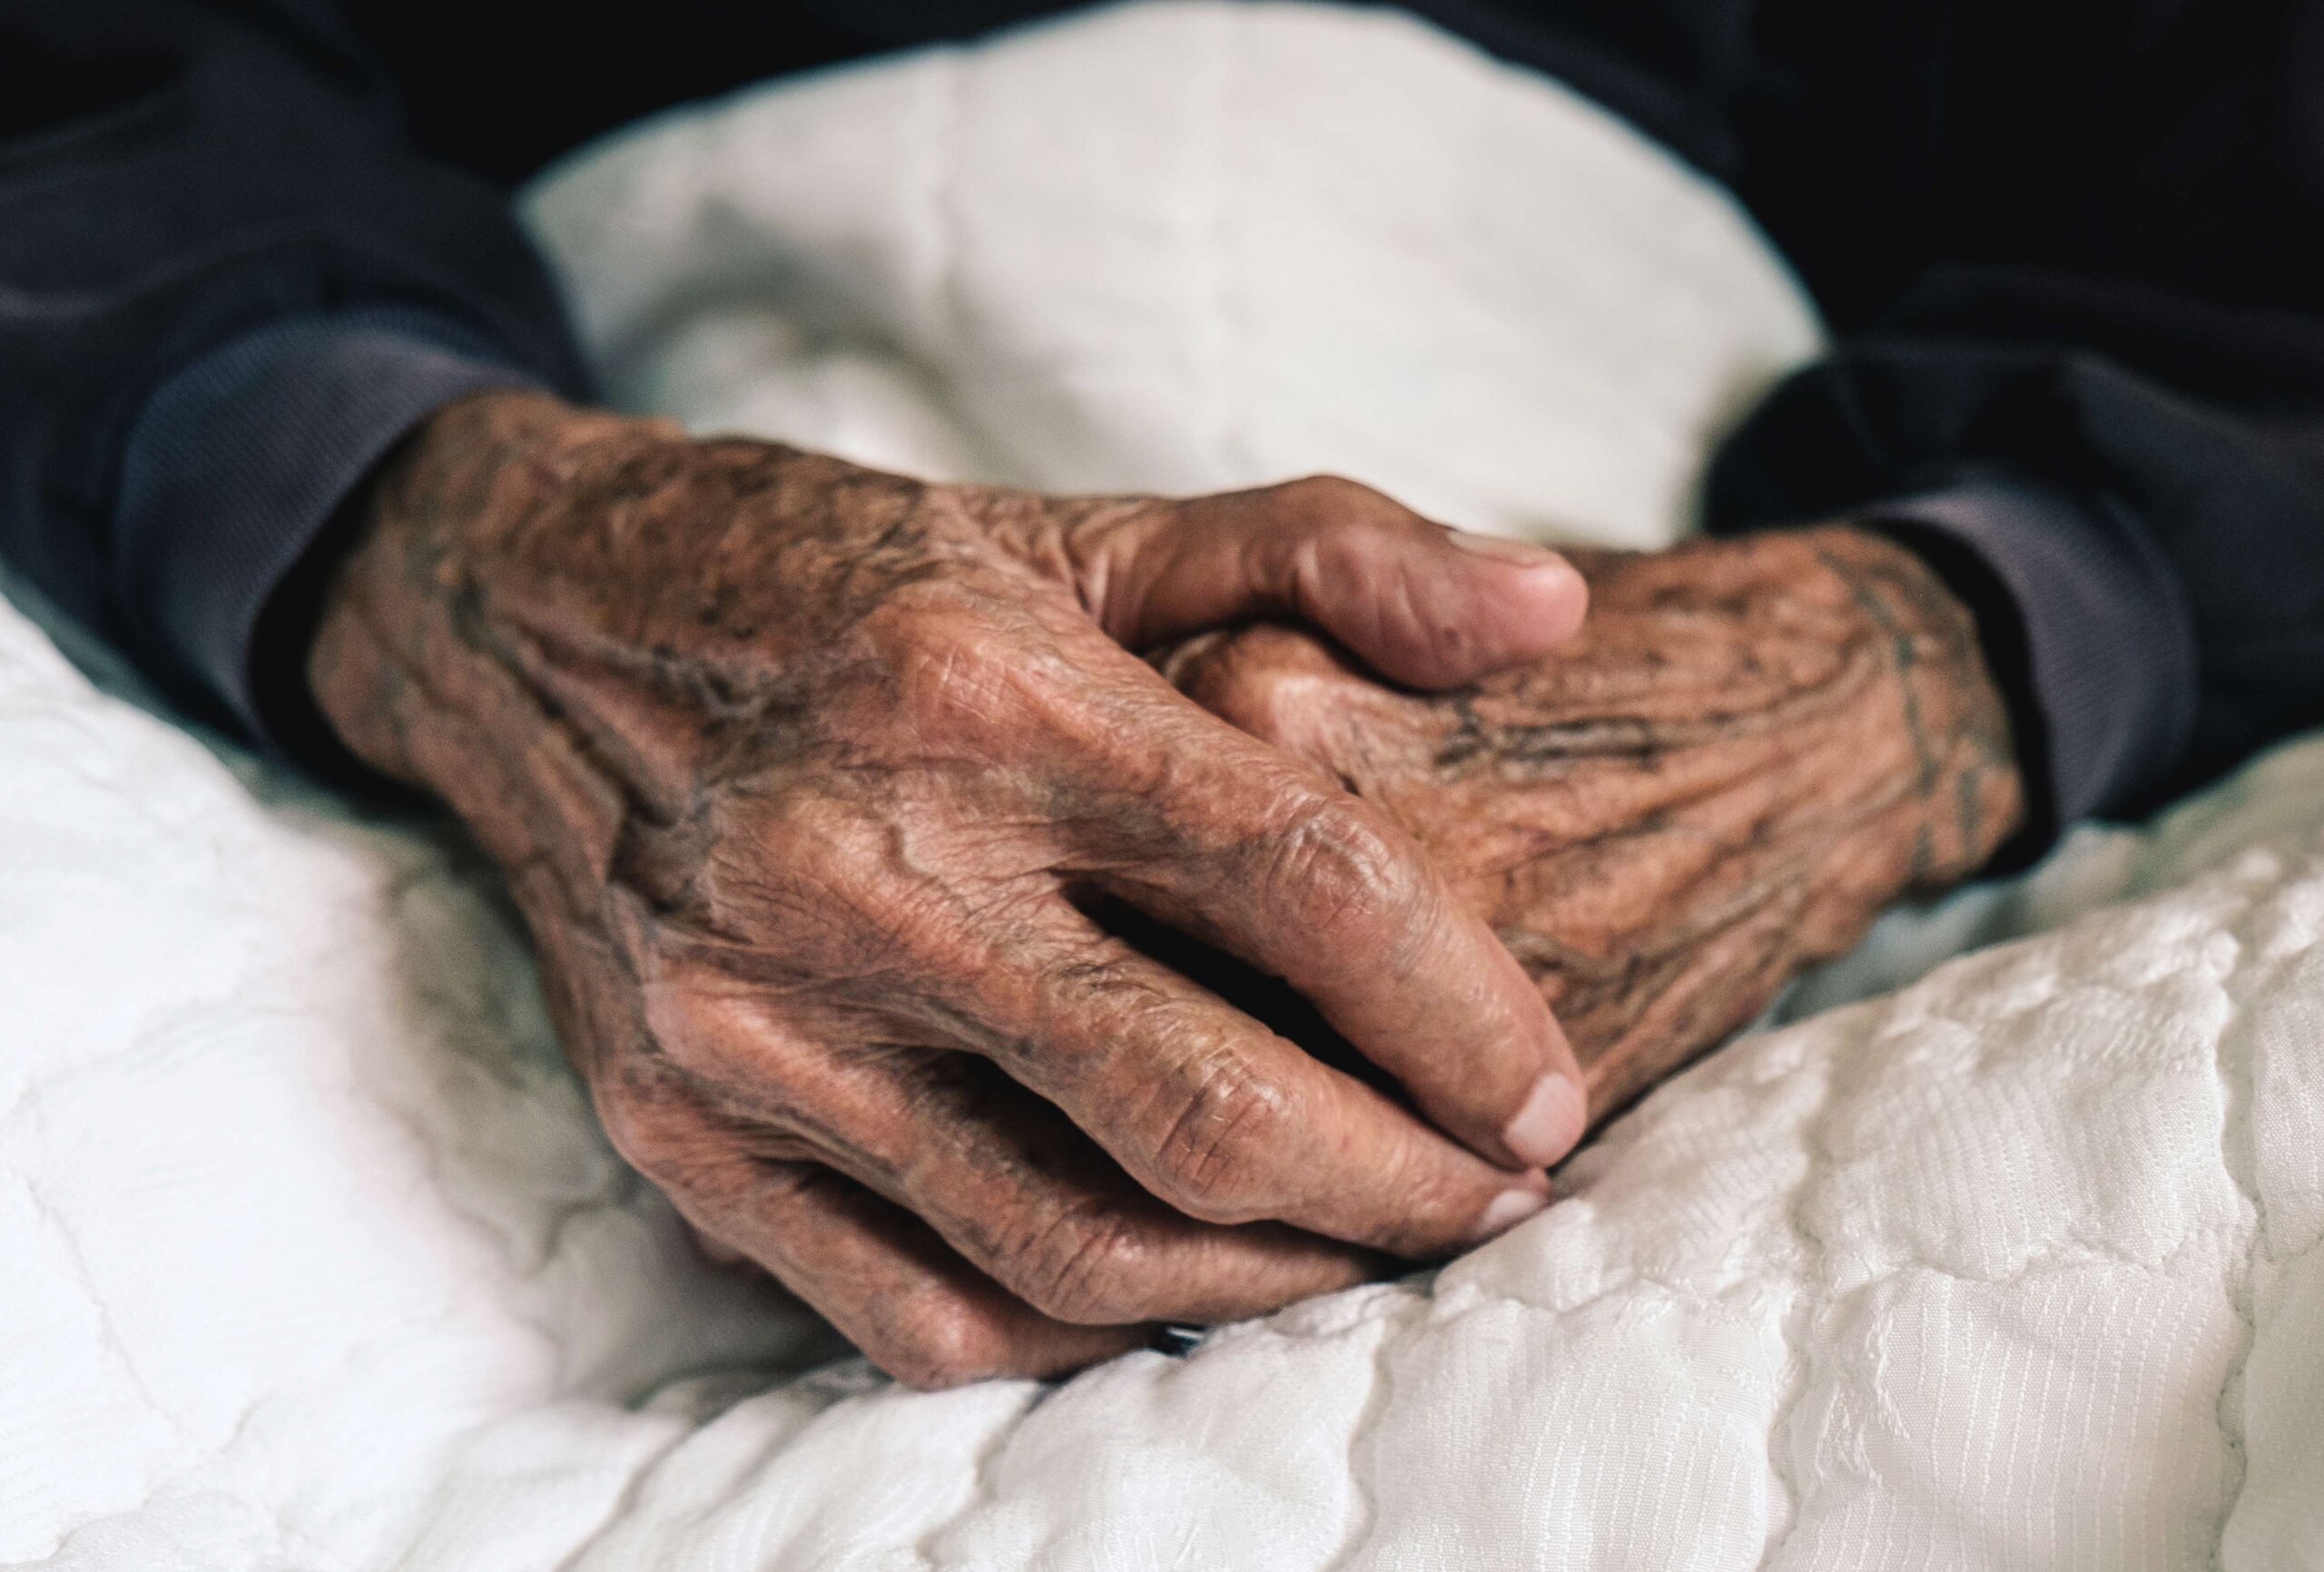 Evidence you need to prove wrongful death in a nursing home